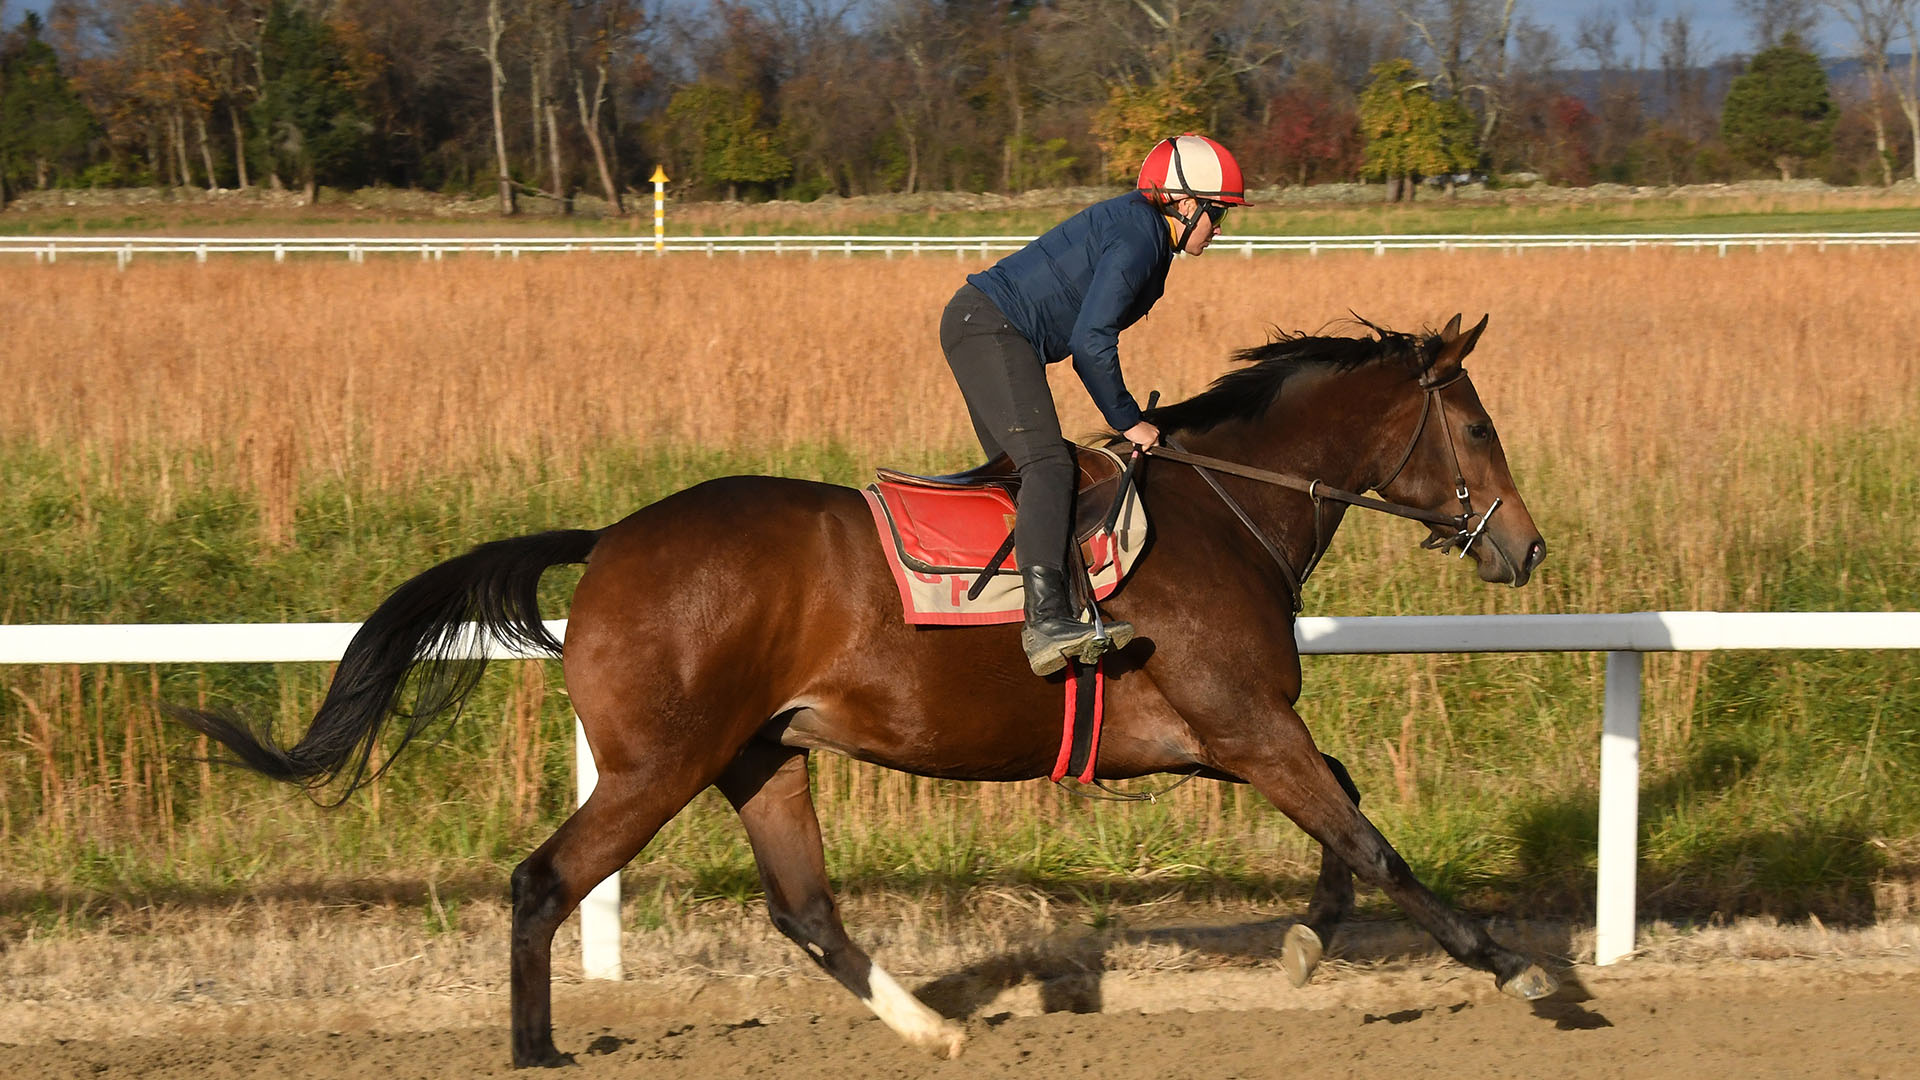 Out of Many, a Unified filly out of the Haynesfield mare Another Ghazo, purchased at Fasig-Tipton's Selected Yearling Showcase and part of a thoroughbred racing partnership. She is shown galloping at the Middleburg Training Center.